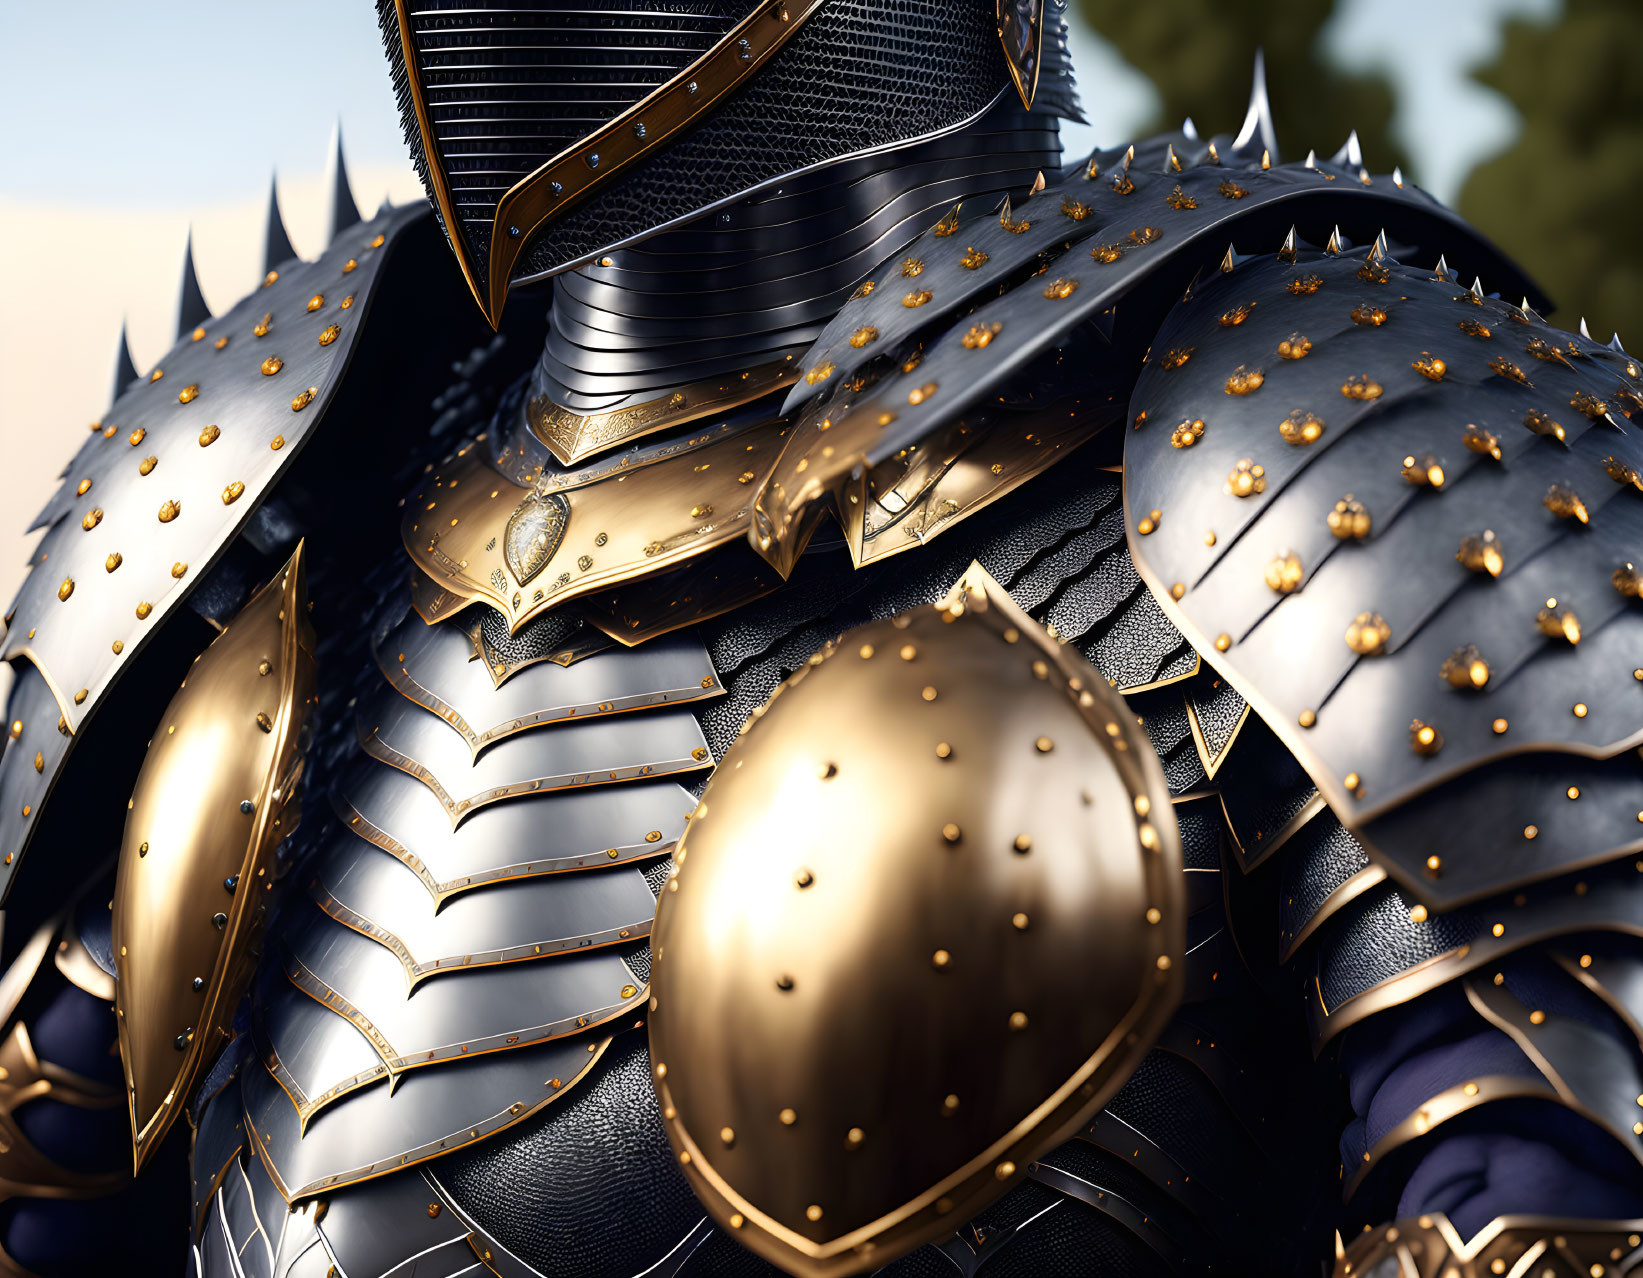 Elaborate Medieval Armor with Spiked Shoulders and Golden Accents